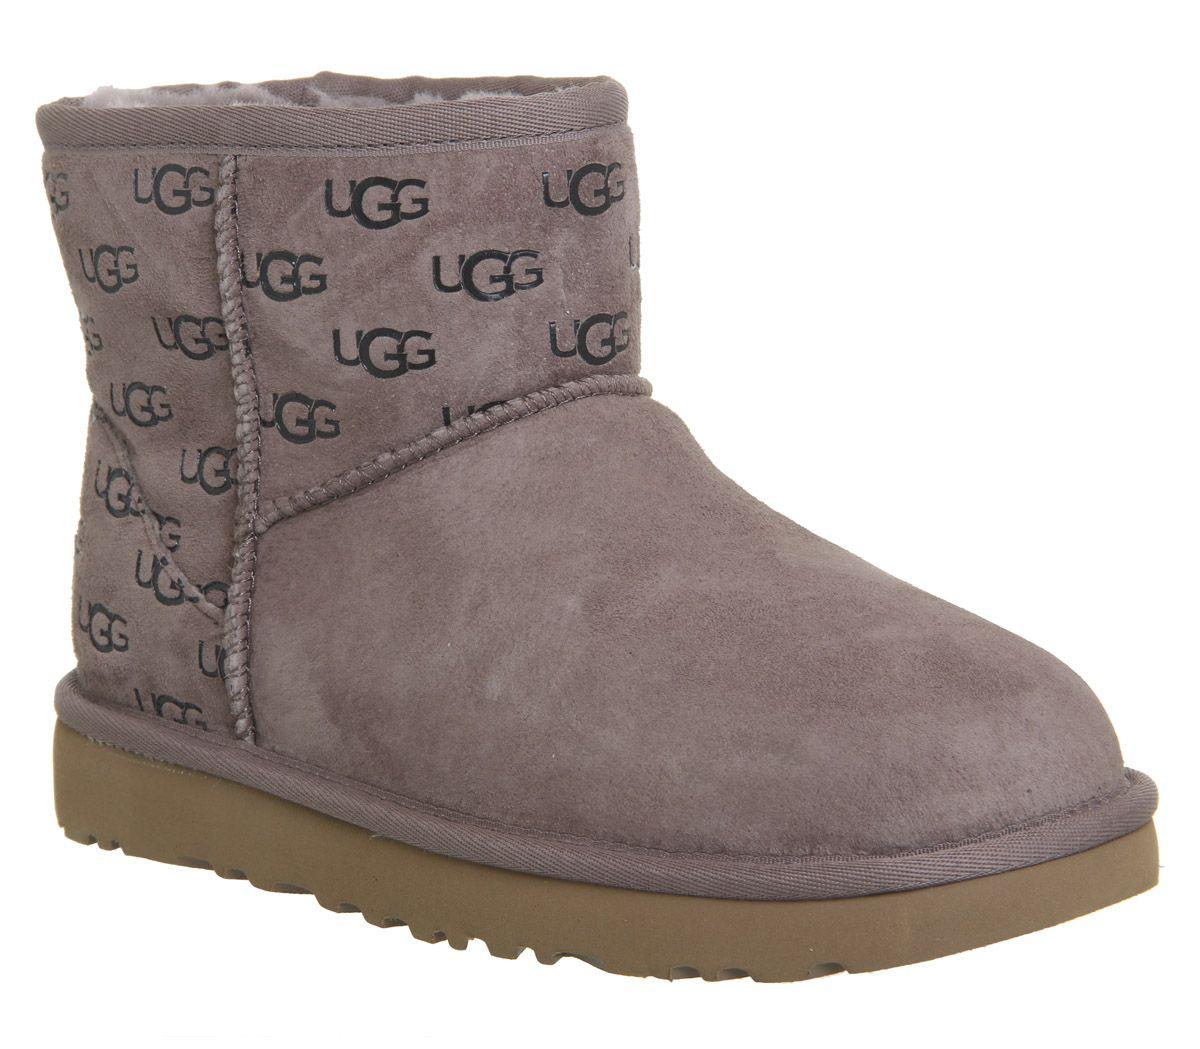 UGG Boots Logo - UGG Classic Mini II Logo Exclusive Boots Grey Logo - Ankle Boots